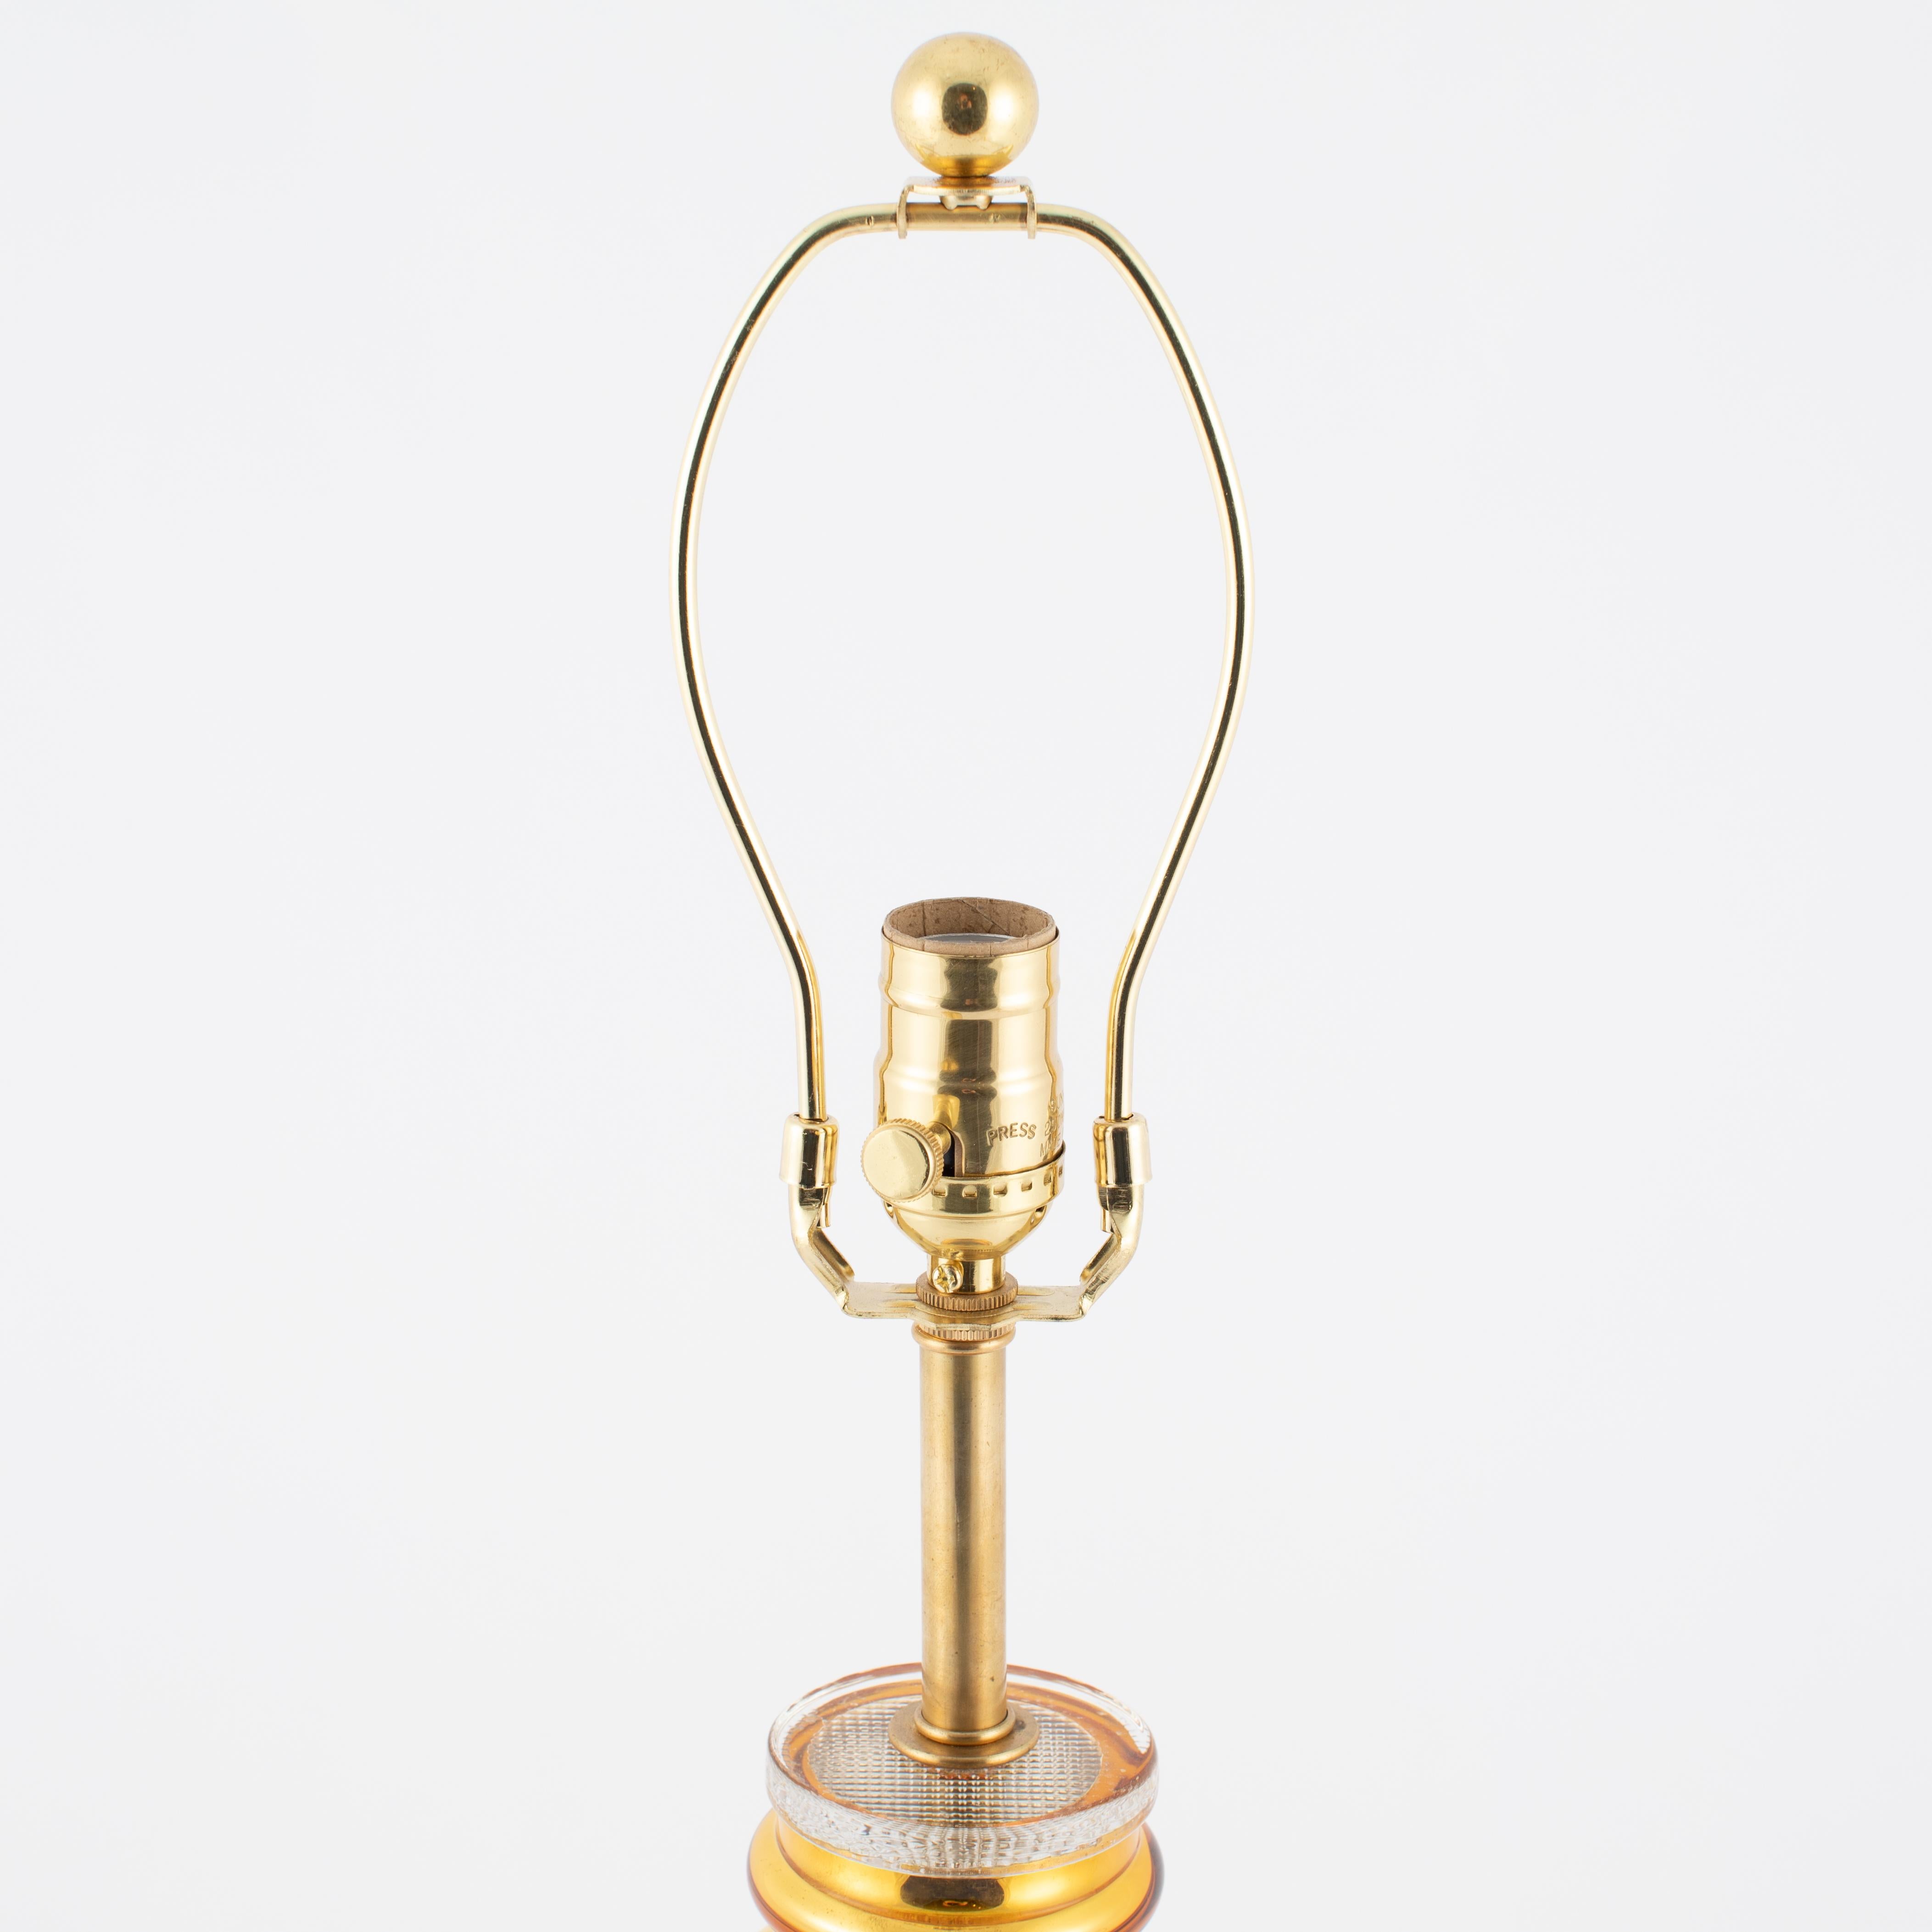 Gorgeous and shiny gold mercury glass TOTEM lamp by Johansfors Glasbruk of Sweden features a series of concentric rings getting smaller from bottom to top. This luminous lamp reflects everything around it, so the tone of the lamp will pick up on its